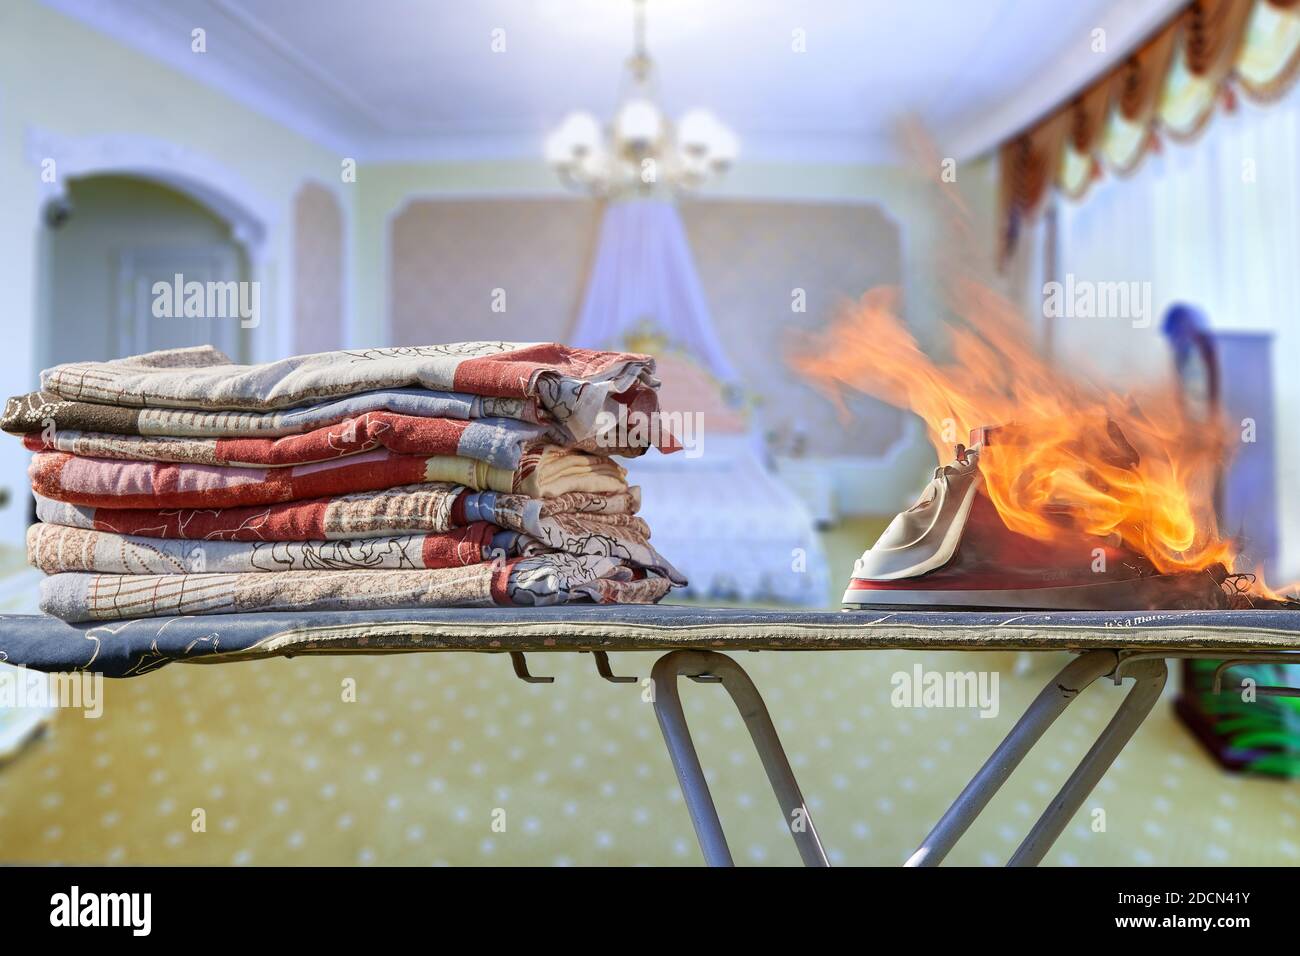 An iron forgotten not turned off caused a fire in the living room. Stock Photo